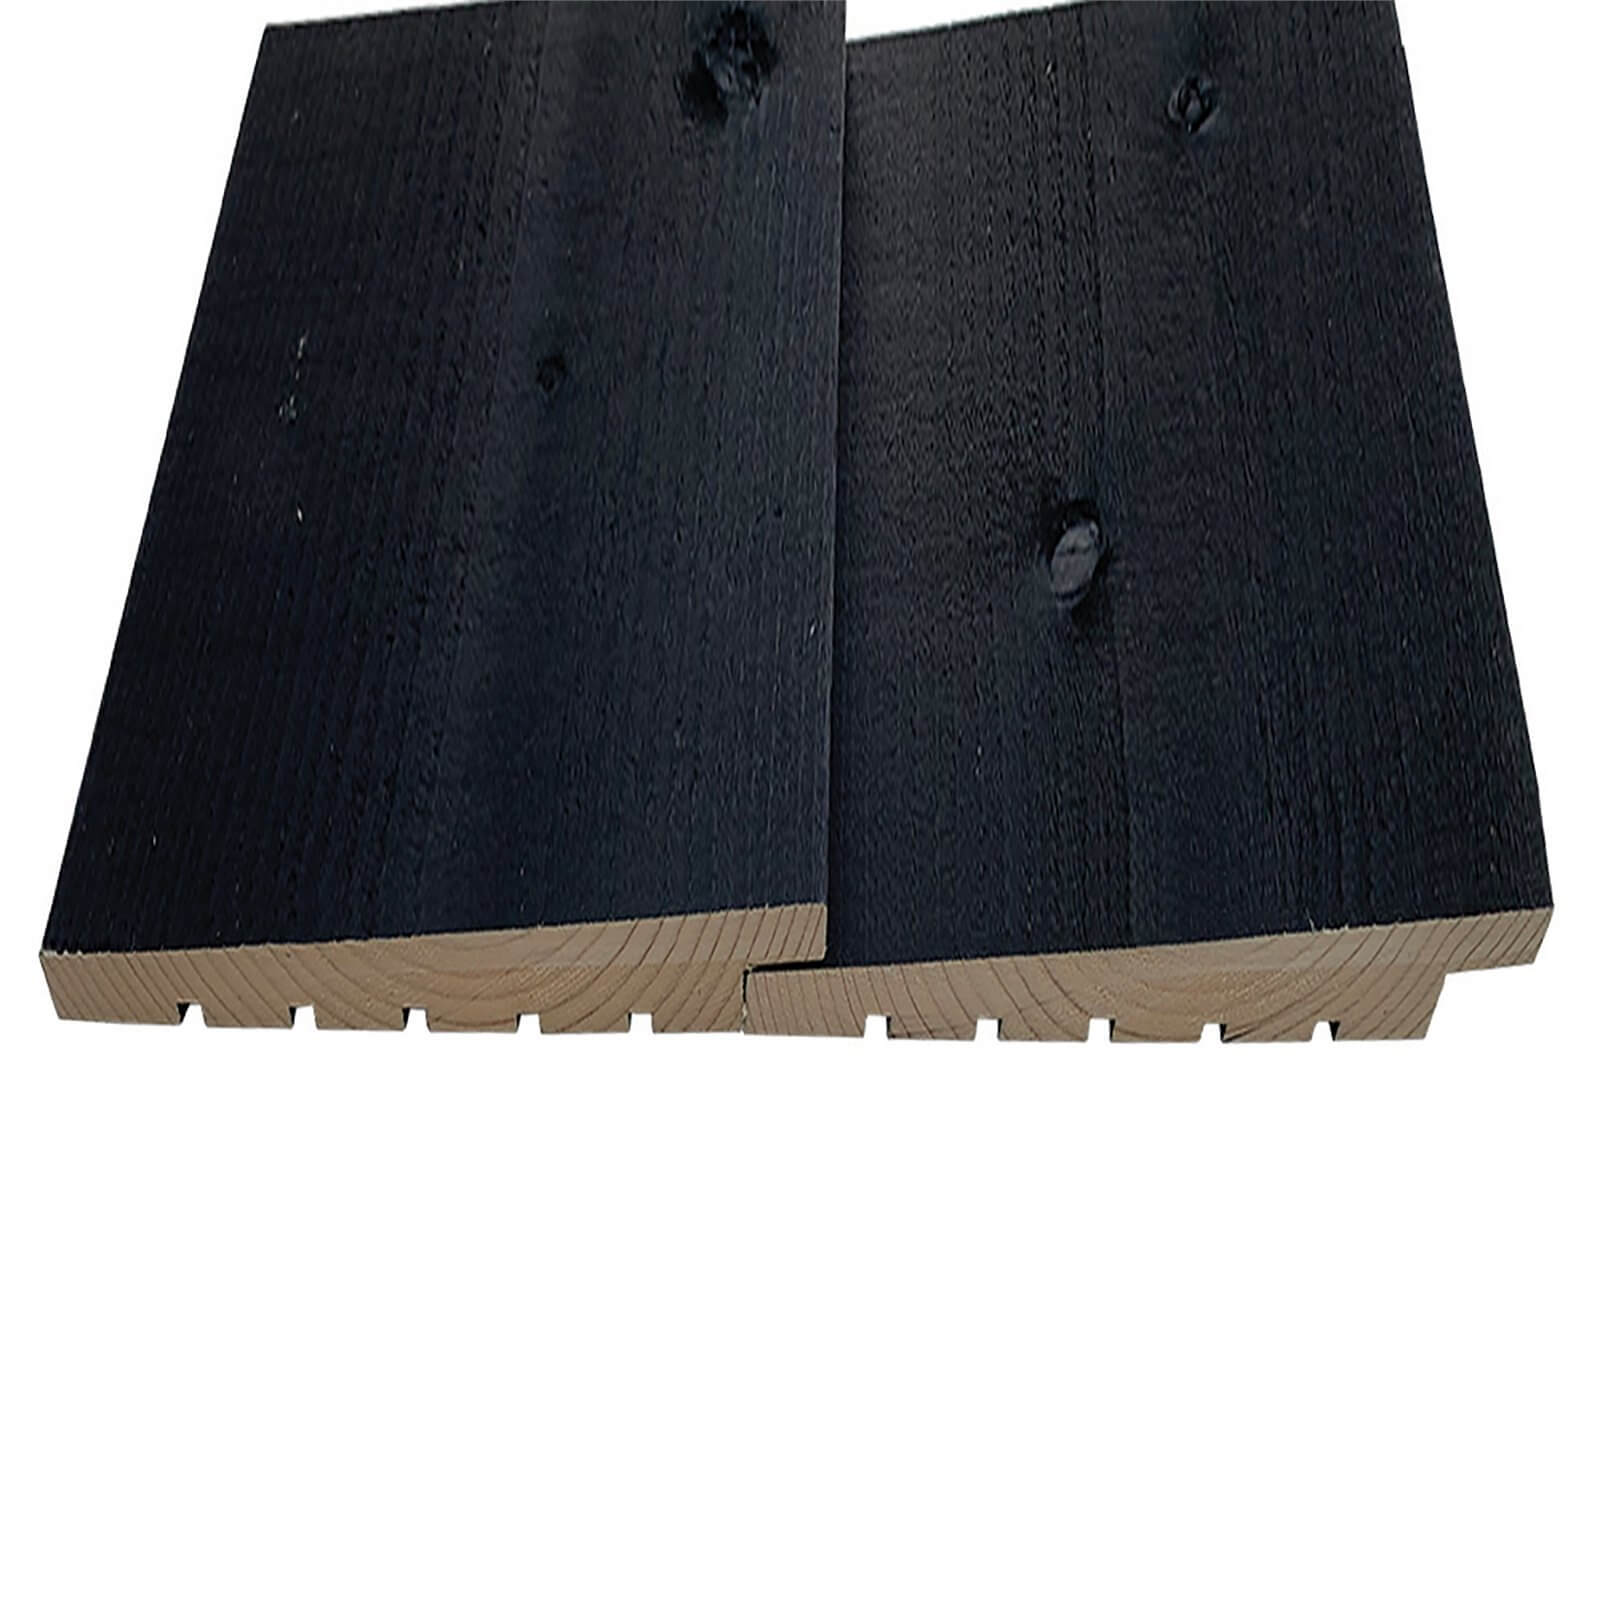 Premium Heavy Duty Black Painted Dutch Featheredge 28x195x4.8mtr Cladding or Fencing (Pack of 4)